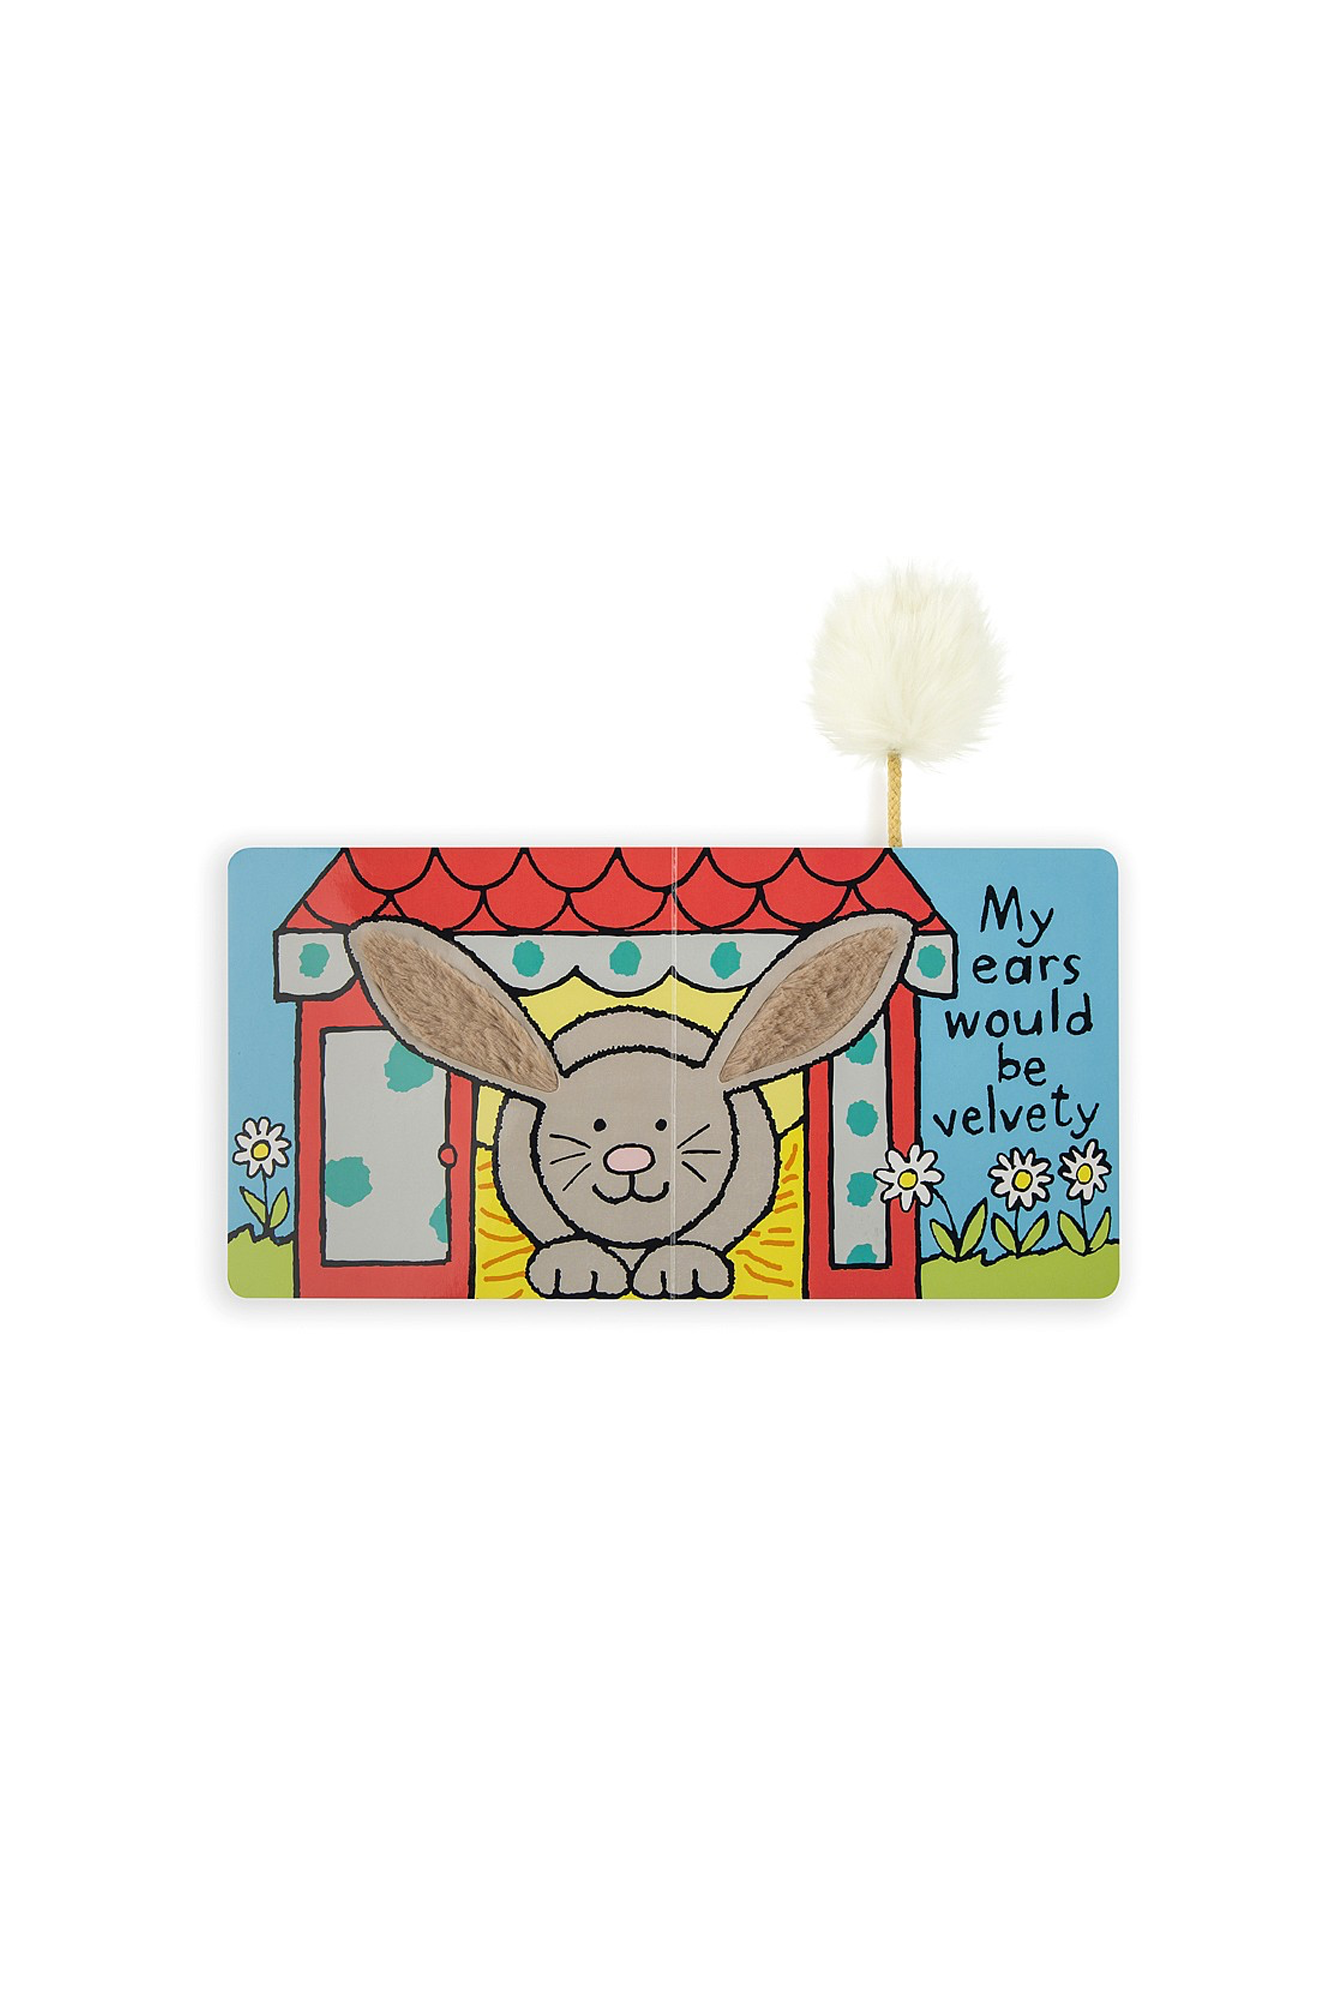 Jellycat If I Were A Bunny Book - Beige